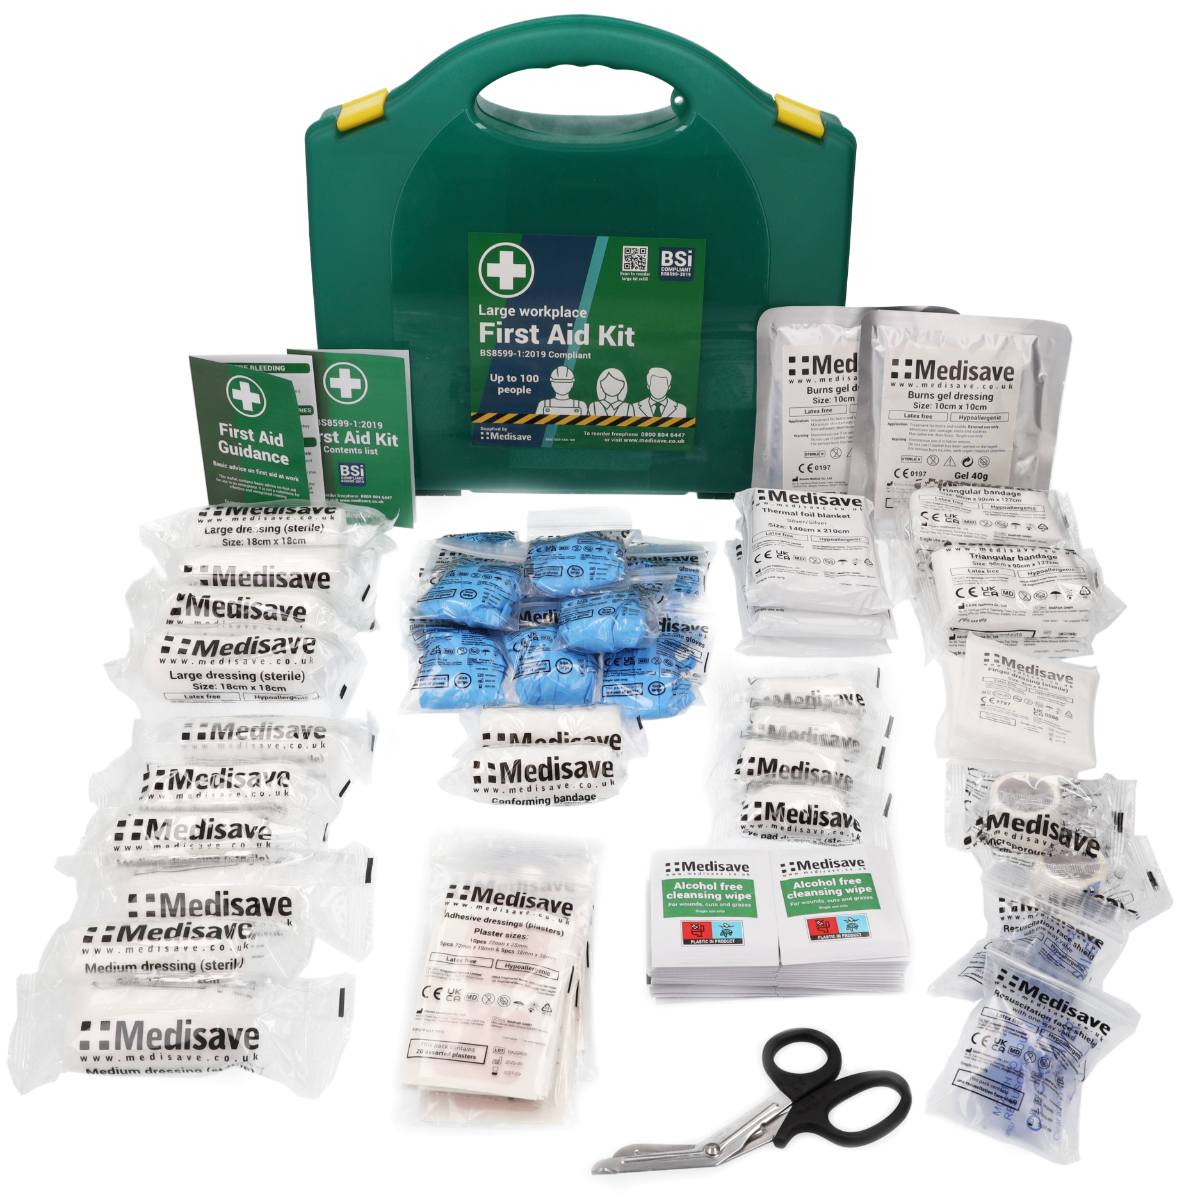 Workplace First Aid Kit - BS8599-1:2019 - Large